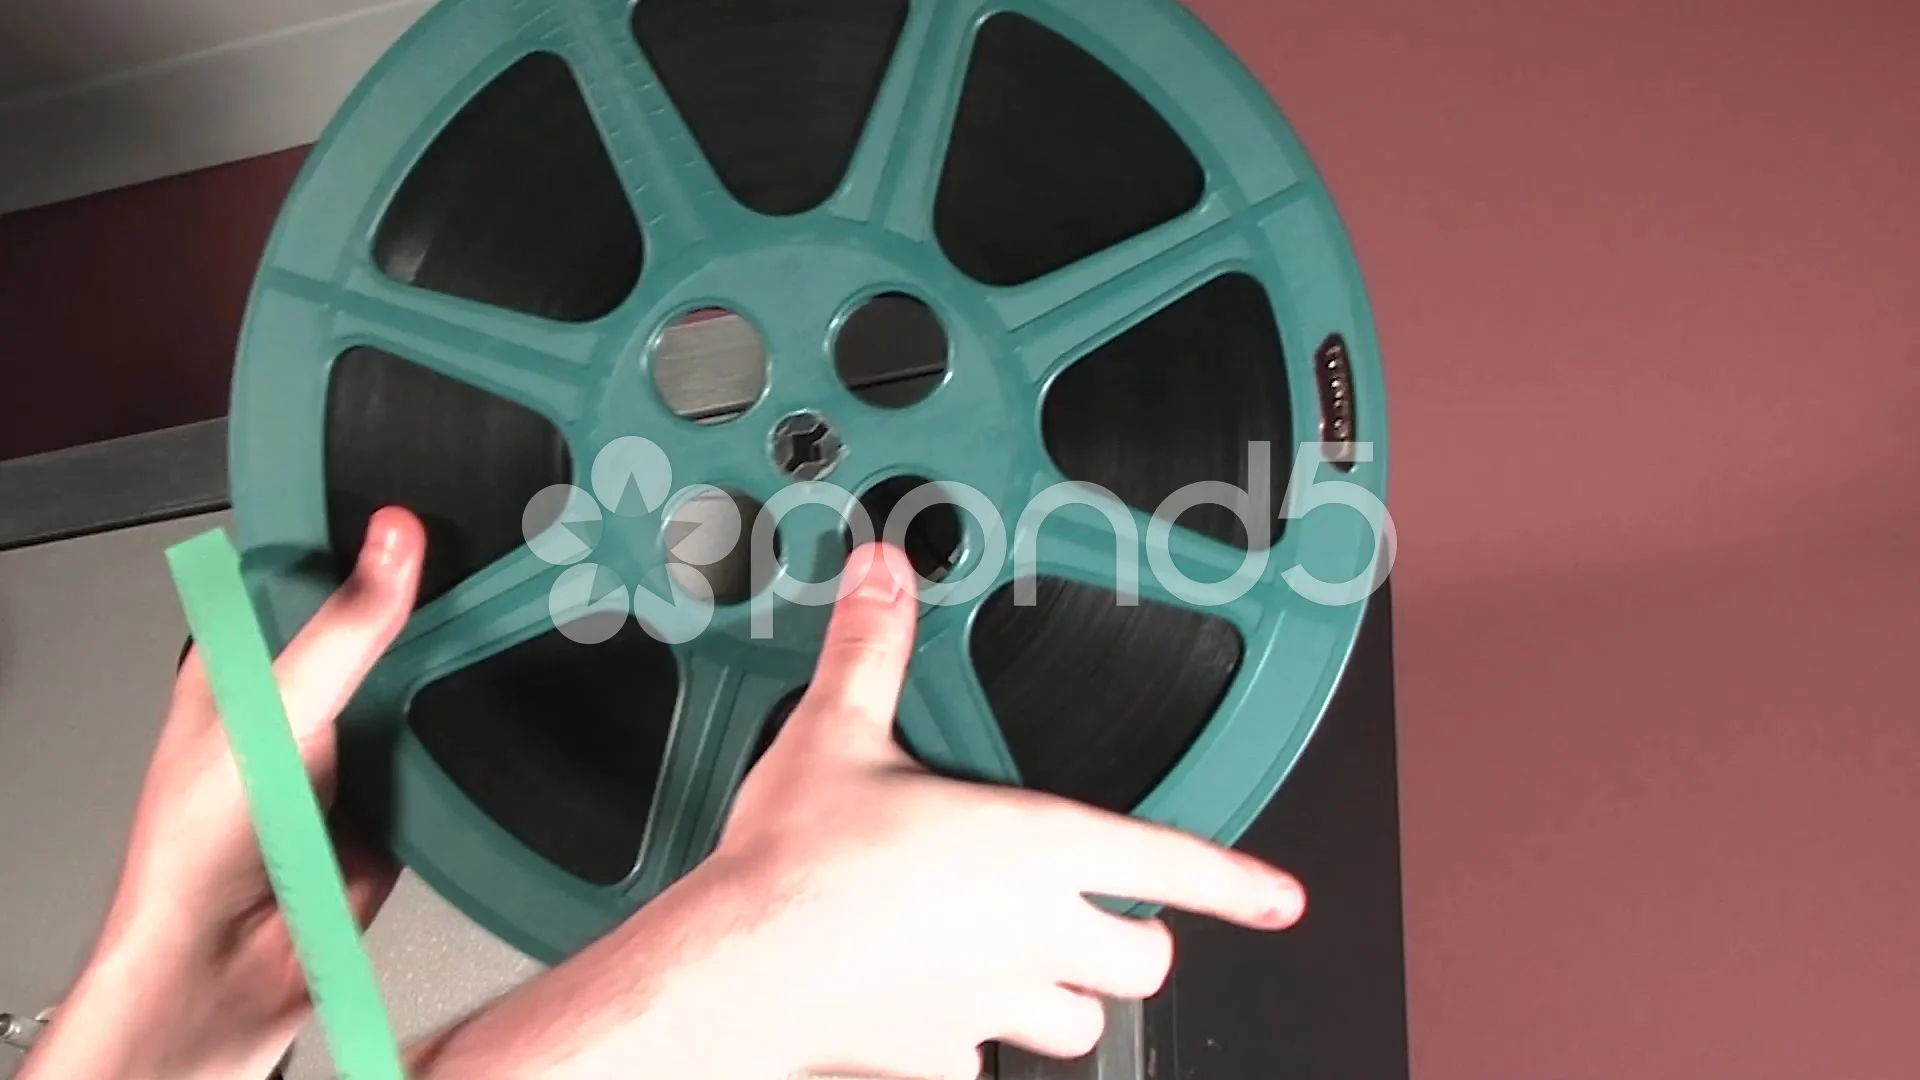 16MM MOVIE FILM REEL BEING PLACED ON PRO, Stock Video